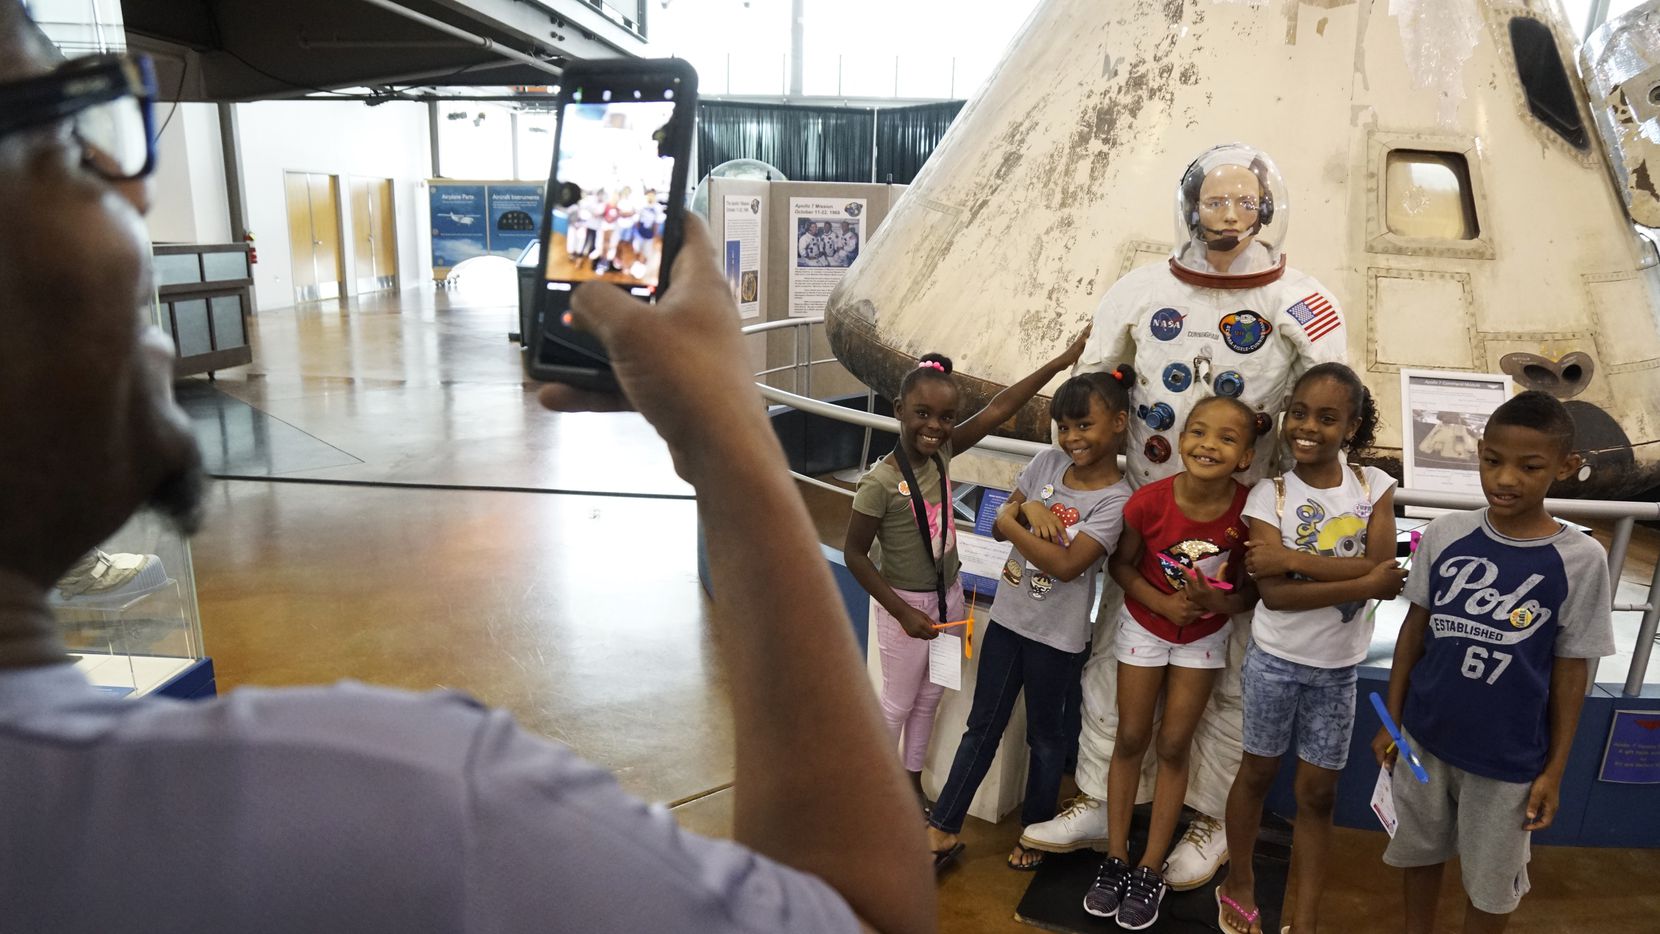 Tim Allen photographs Neriyah Aries (6), Amani Aries (8), Timia Allen (7), Leandra Chaires (11), and Devin Fitzgerald, in front of a space capsule at Big Thought's fifth annual Dallas City of Learning Turn Up at the Frontiers of Flight Museum in Dallas, Texas on Saturday, June 23, 2018.